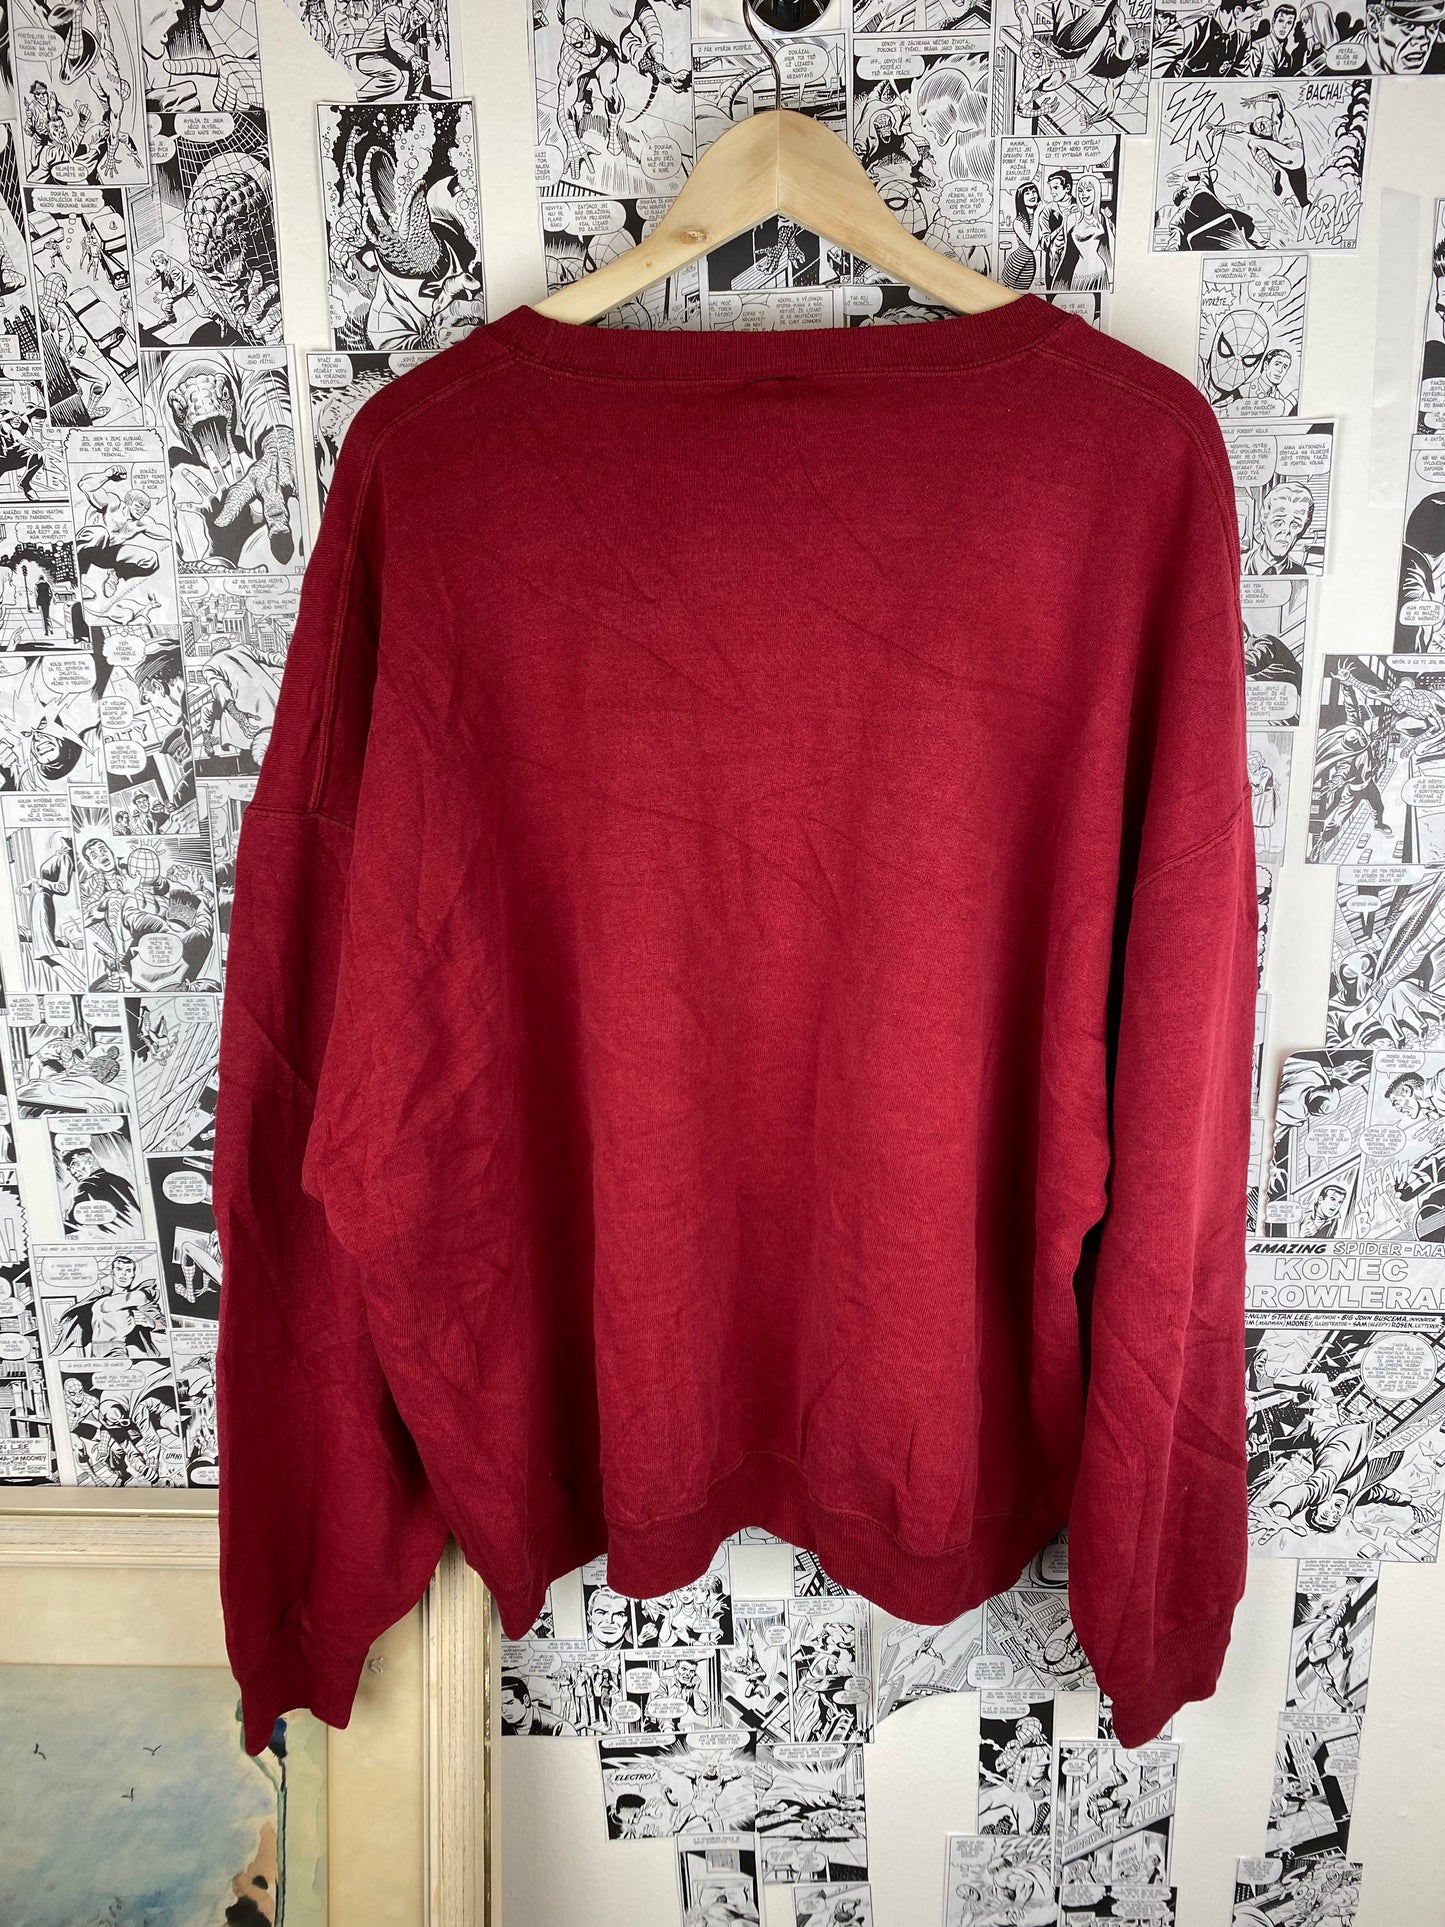 Vintage “State Farm” Russell 90s Crewneck - size XXL